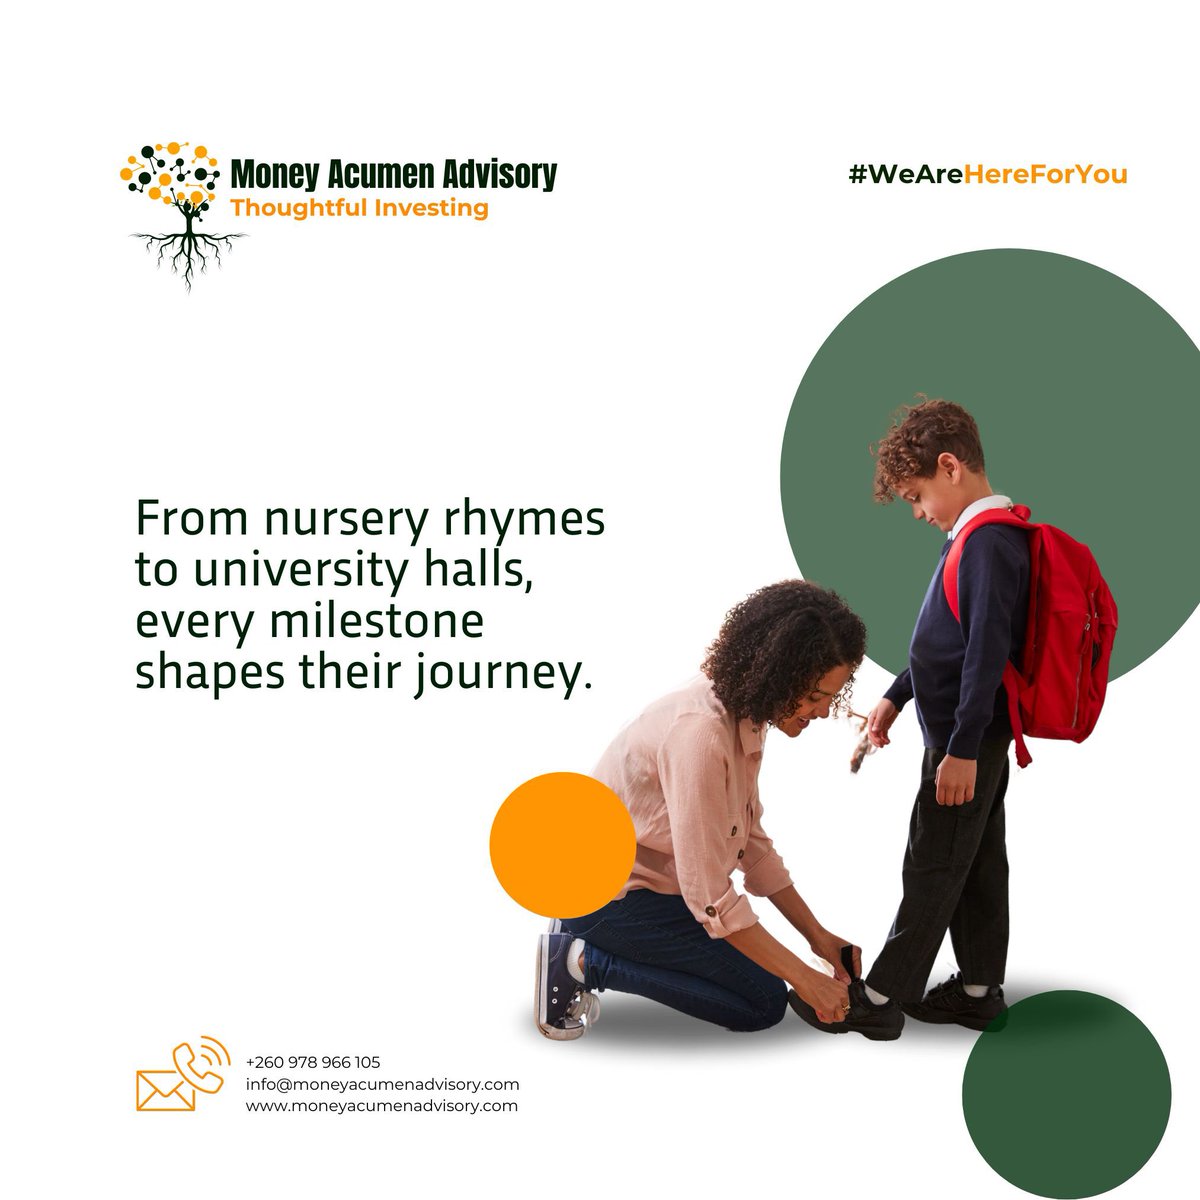 From nursery rhymes to university halls, every milestone shapes their journey. Start planning their education today with our expert guidance. 
We're here for you every step of the way.

#WeAreHereForYou #InvestmentAdvisors #WealthManagers #MoneyAcumenAdvsiory #ThoughtfulInvesting